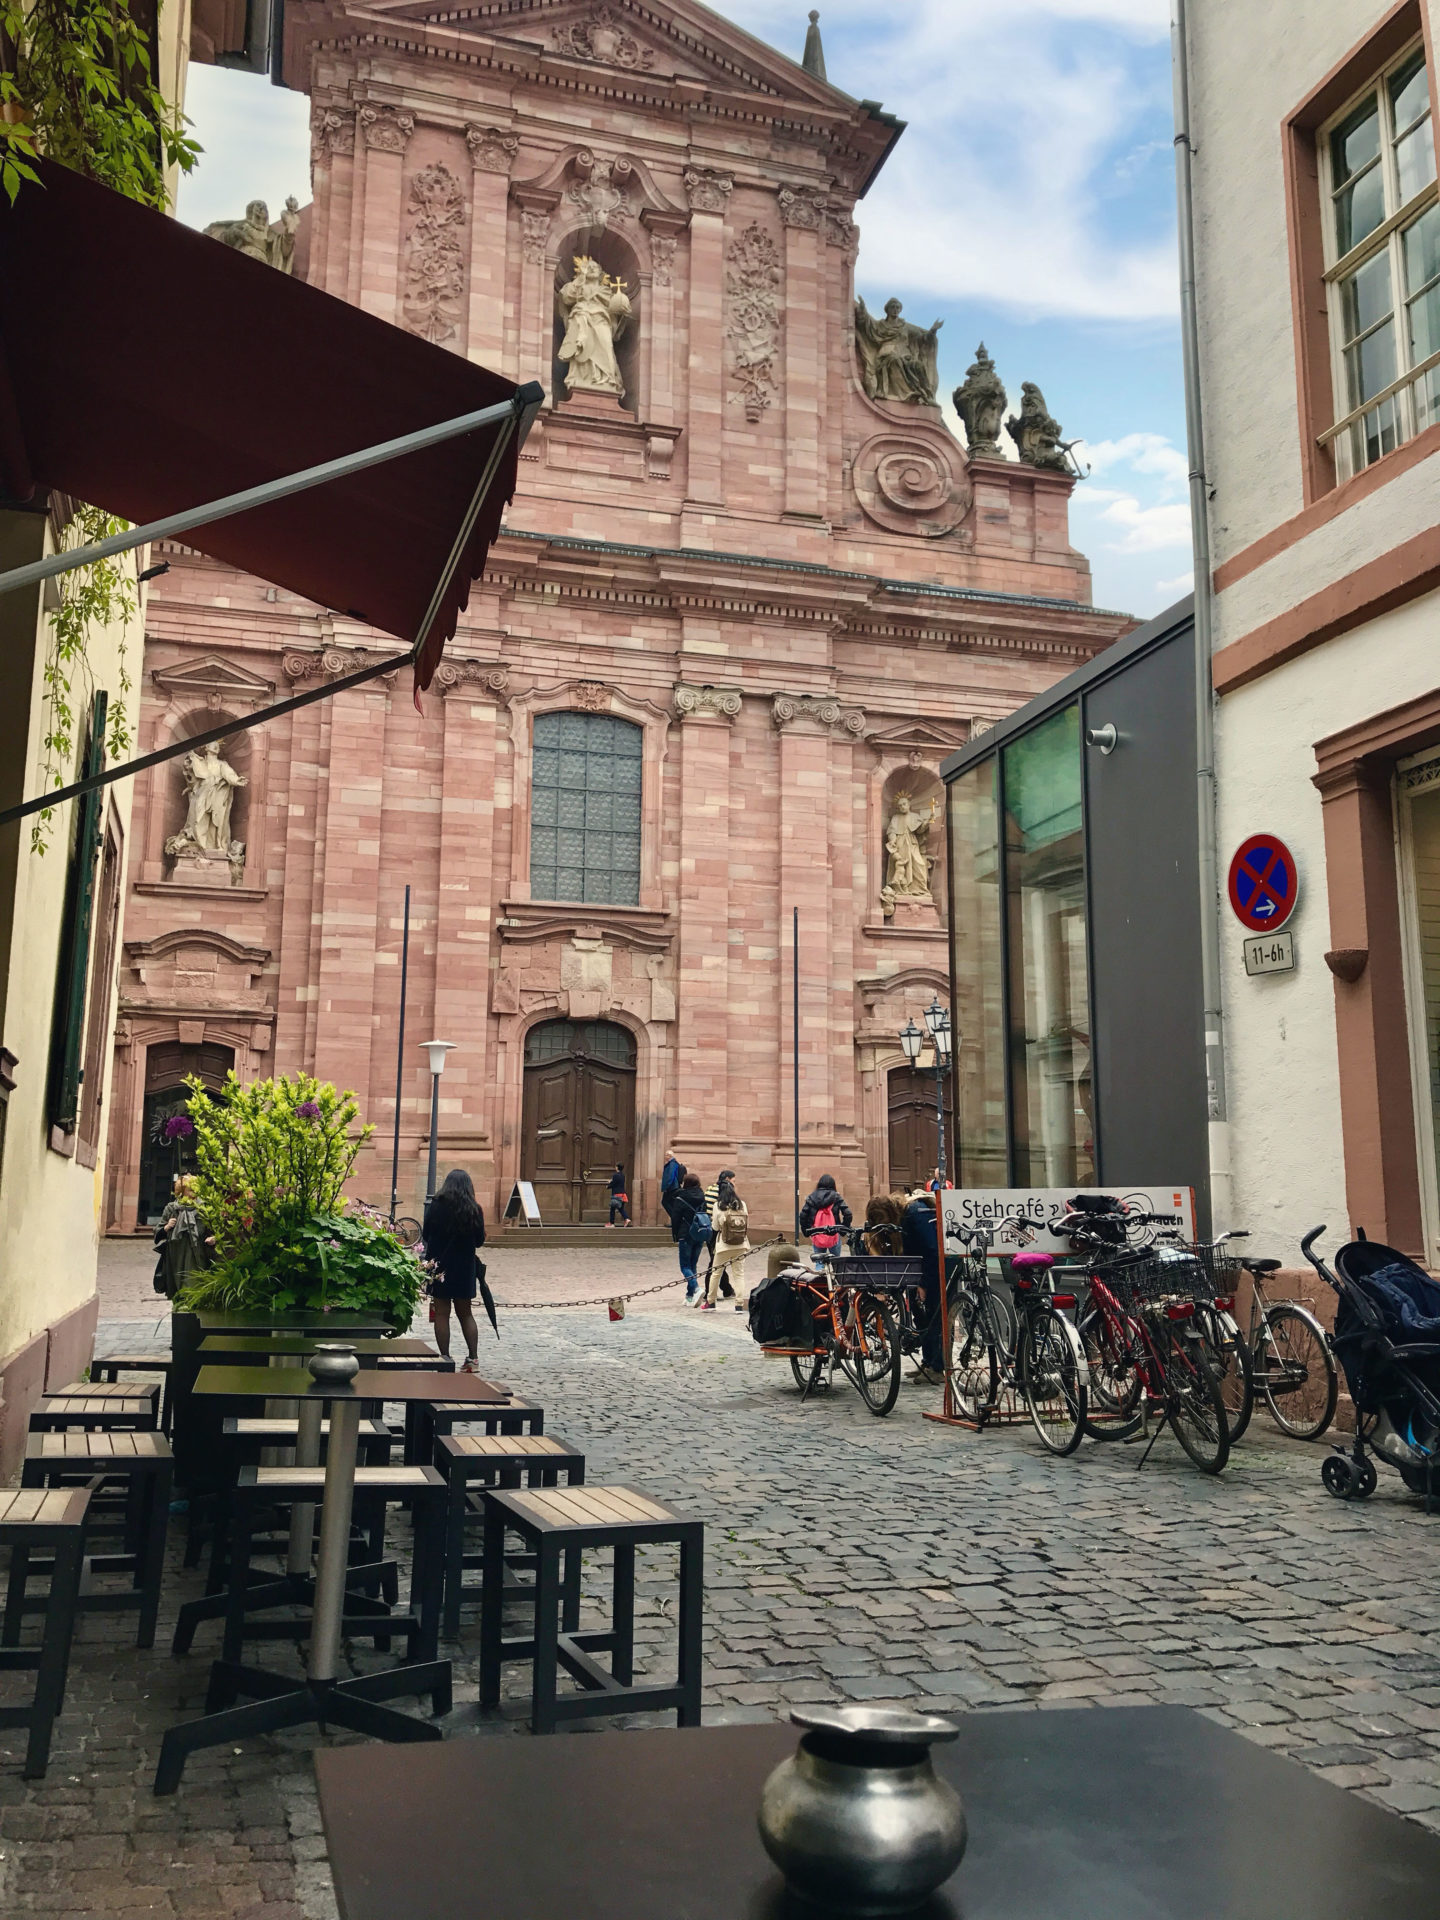 Packing List for Germany in Spring: Catholic church in Heidelberg, Germany